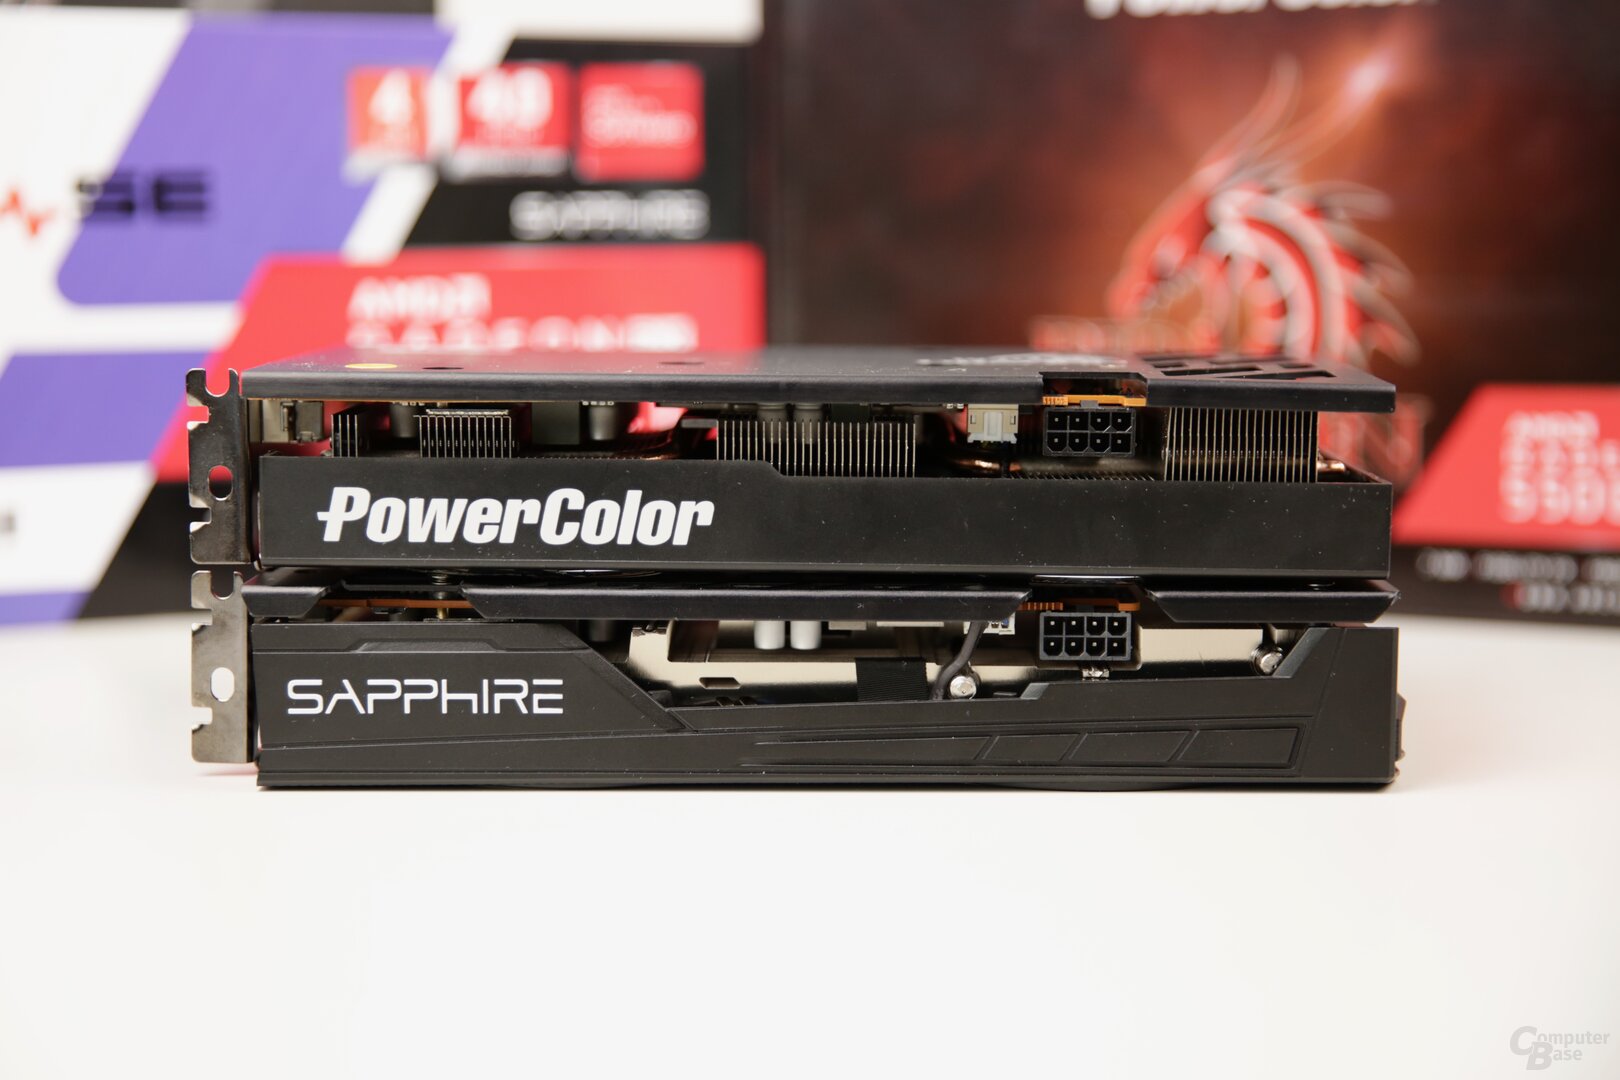 Both 2-slot graphics cards take nothing in terms of form factor